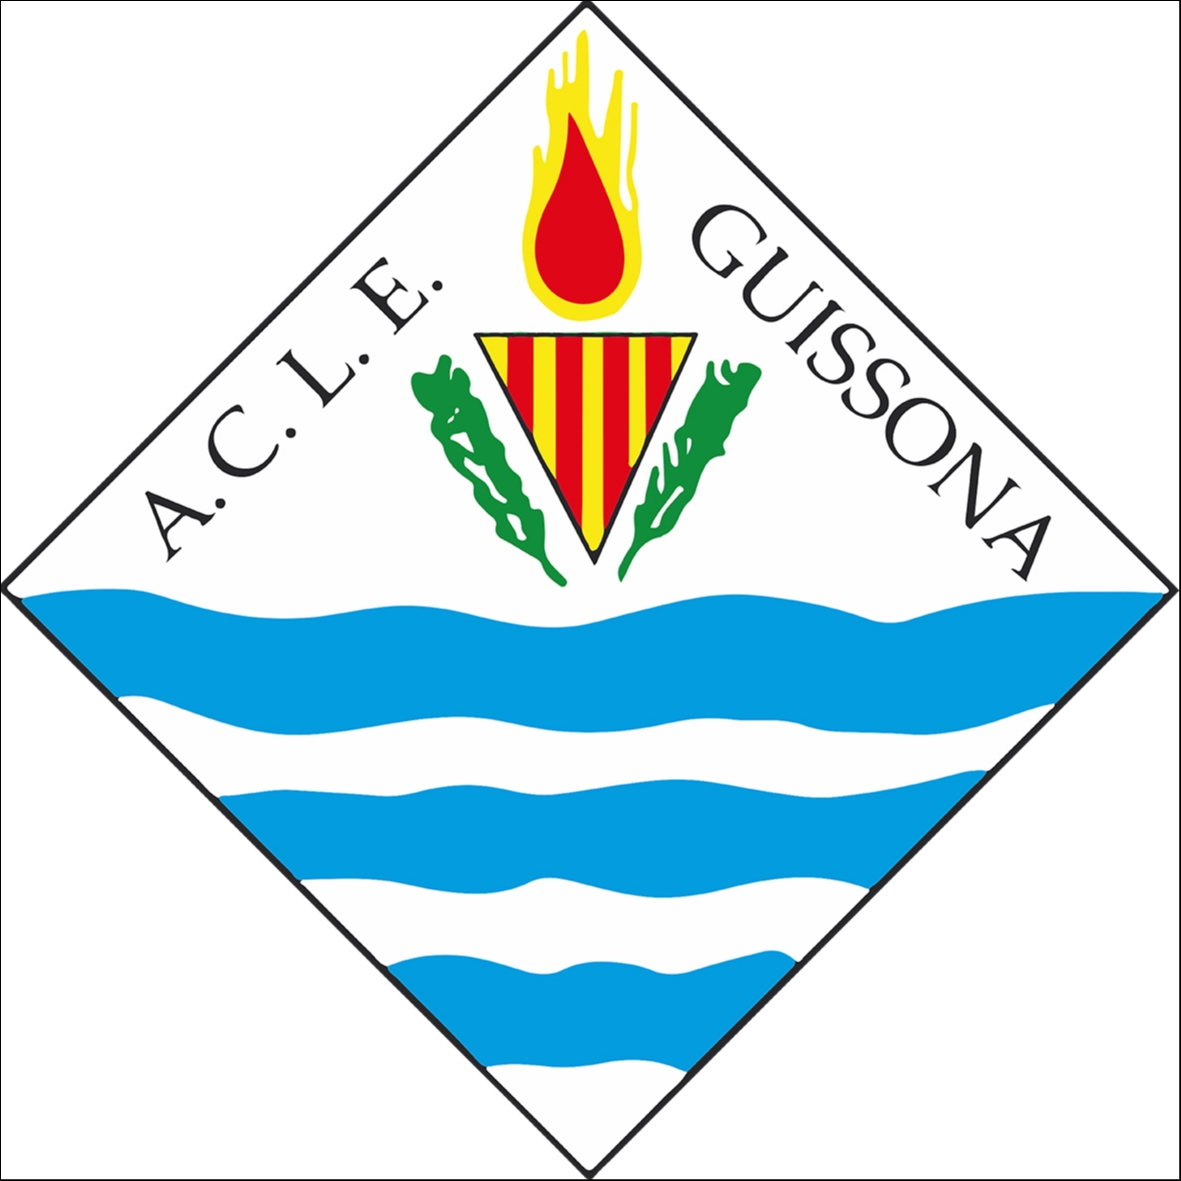 ACLE GUISSONA